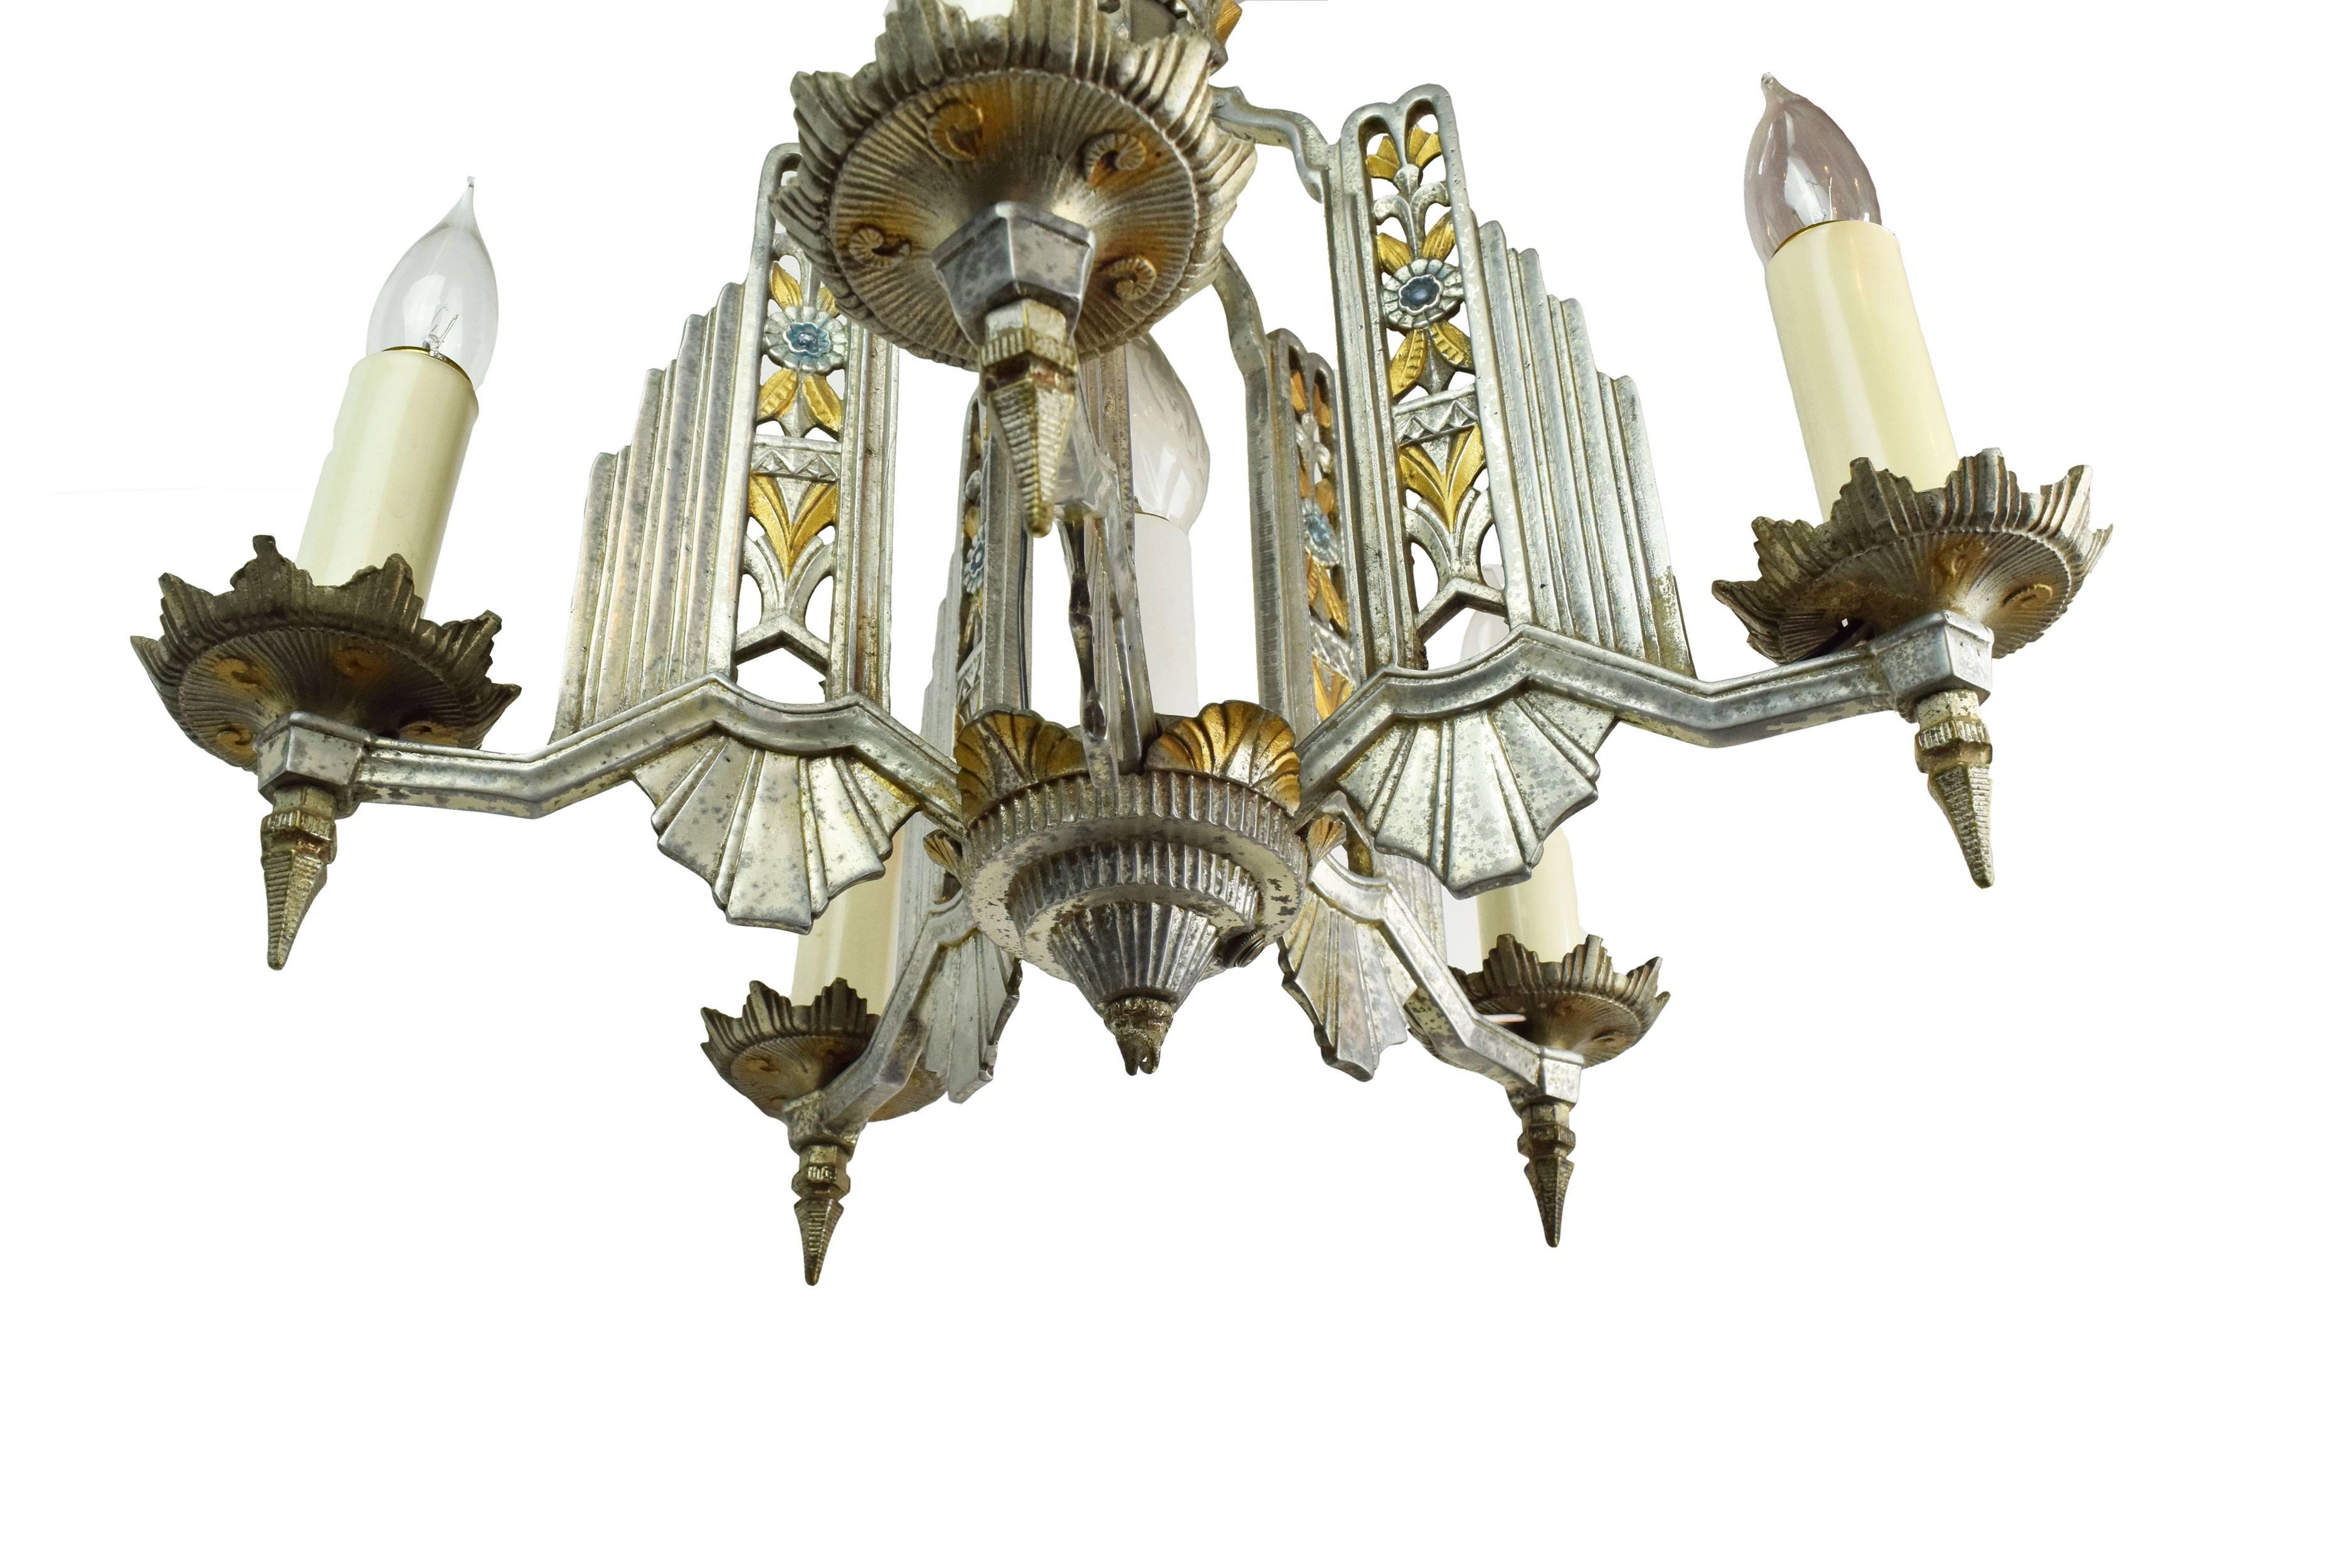 This beautiful cast aluminum chandelier with Art Deco detailing will be the perfect addition to your home! The Art Deco style will look great the foyer of your home,

circa 1930
Condition: Excellent
Finish: Original
Country of origin: USA
Five